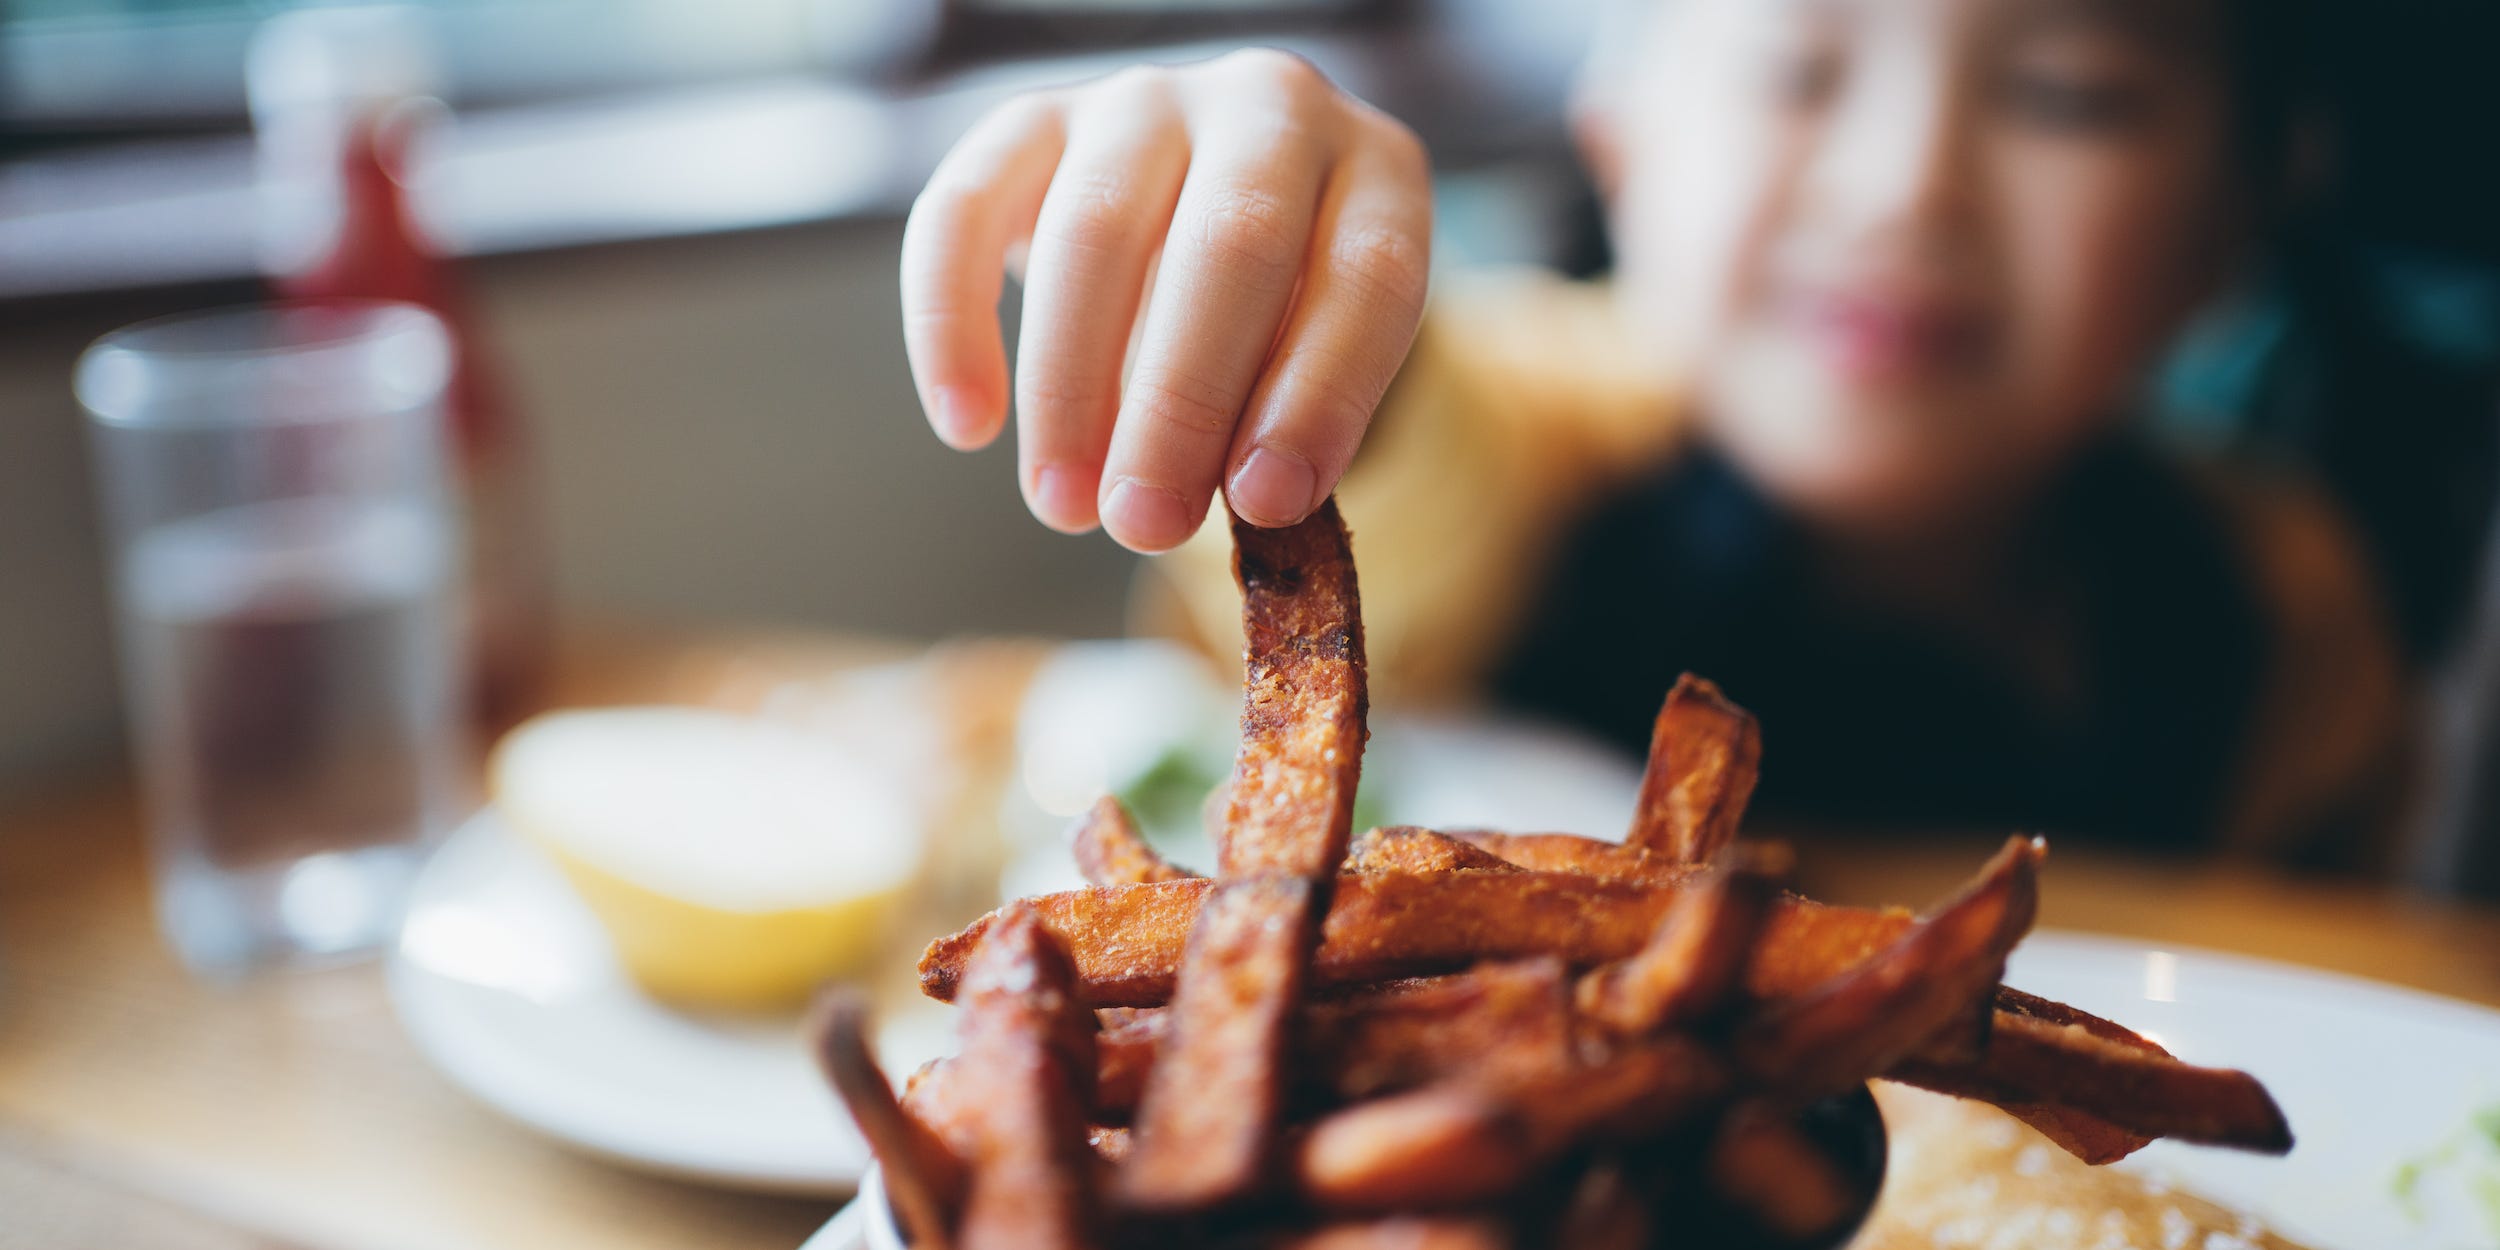 A young girl reaches across the table to grab a sweet potato fry.